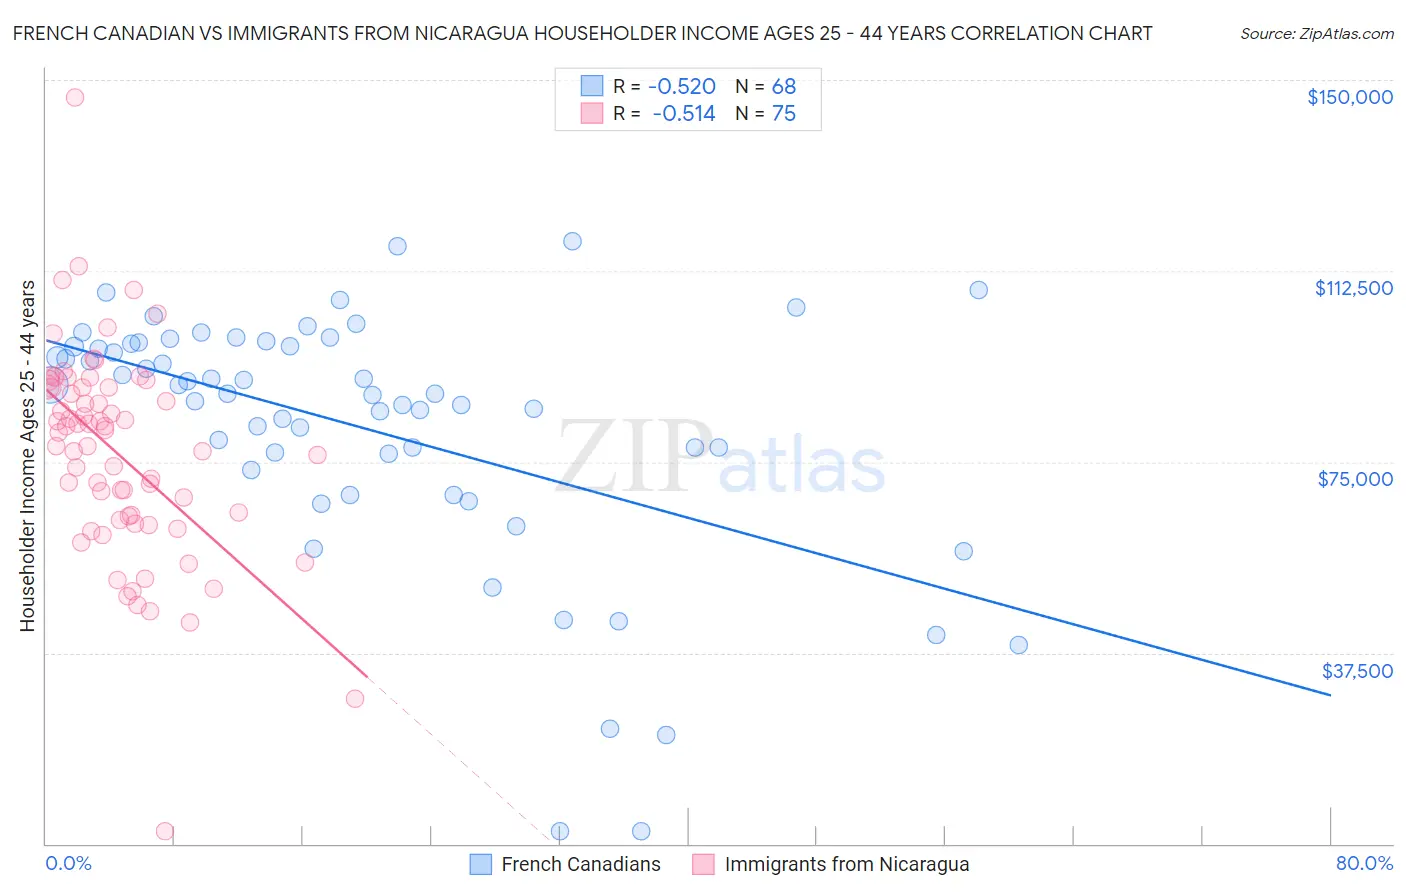 French Canadian vs Immigrants from Nicaragua Householder Income Ages 25 - 44 years